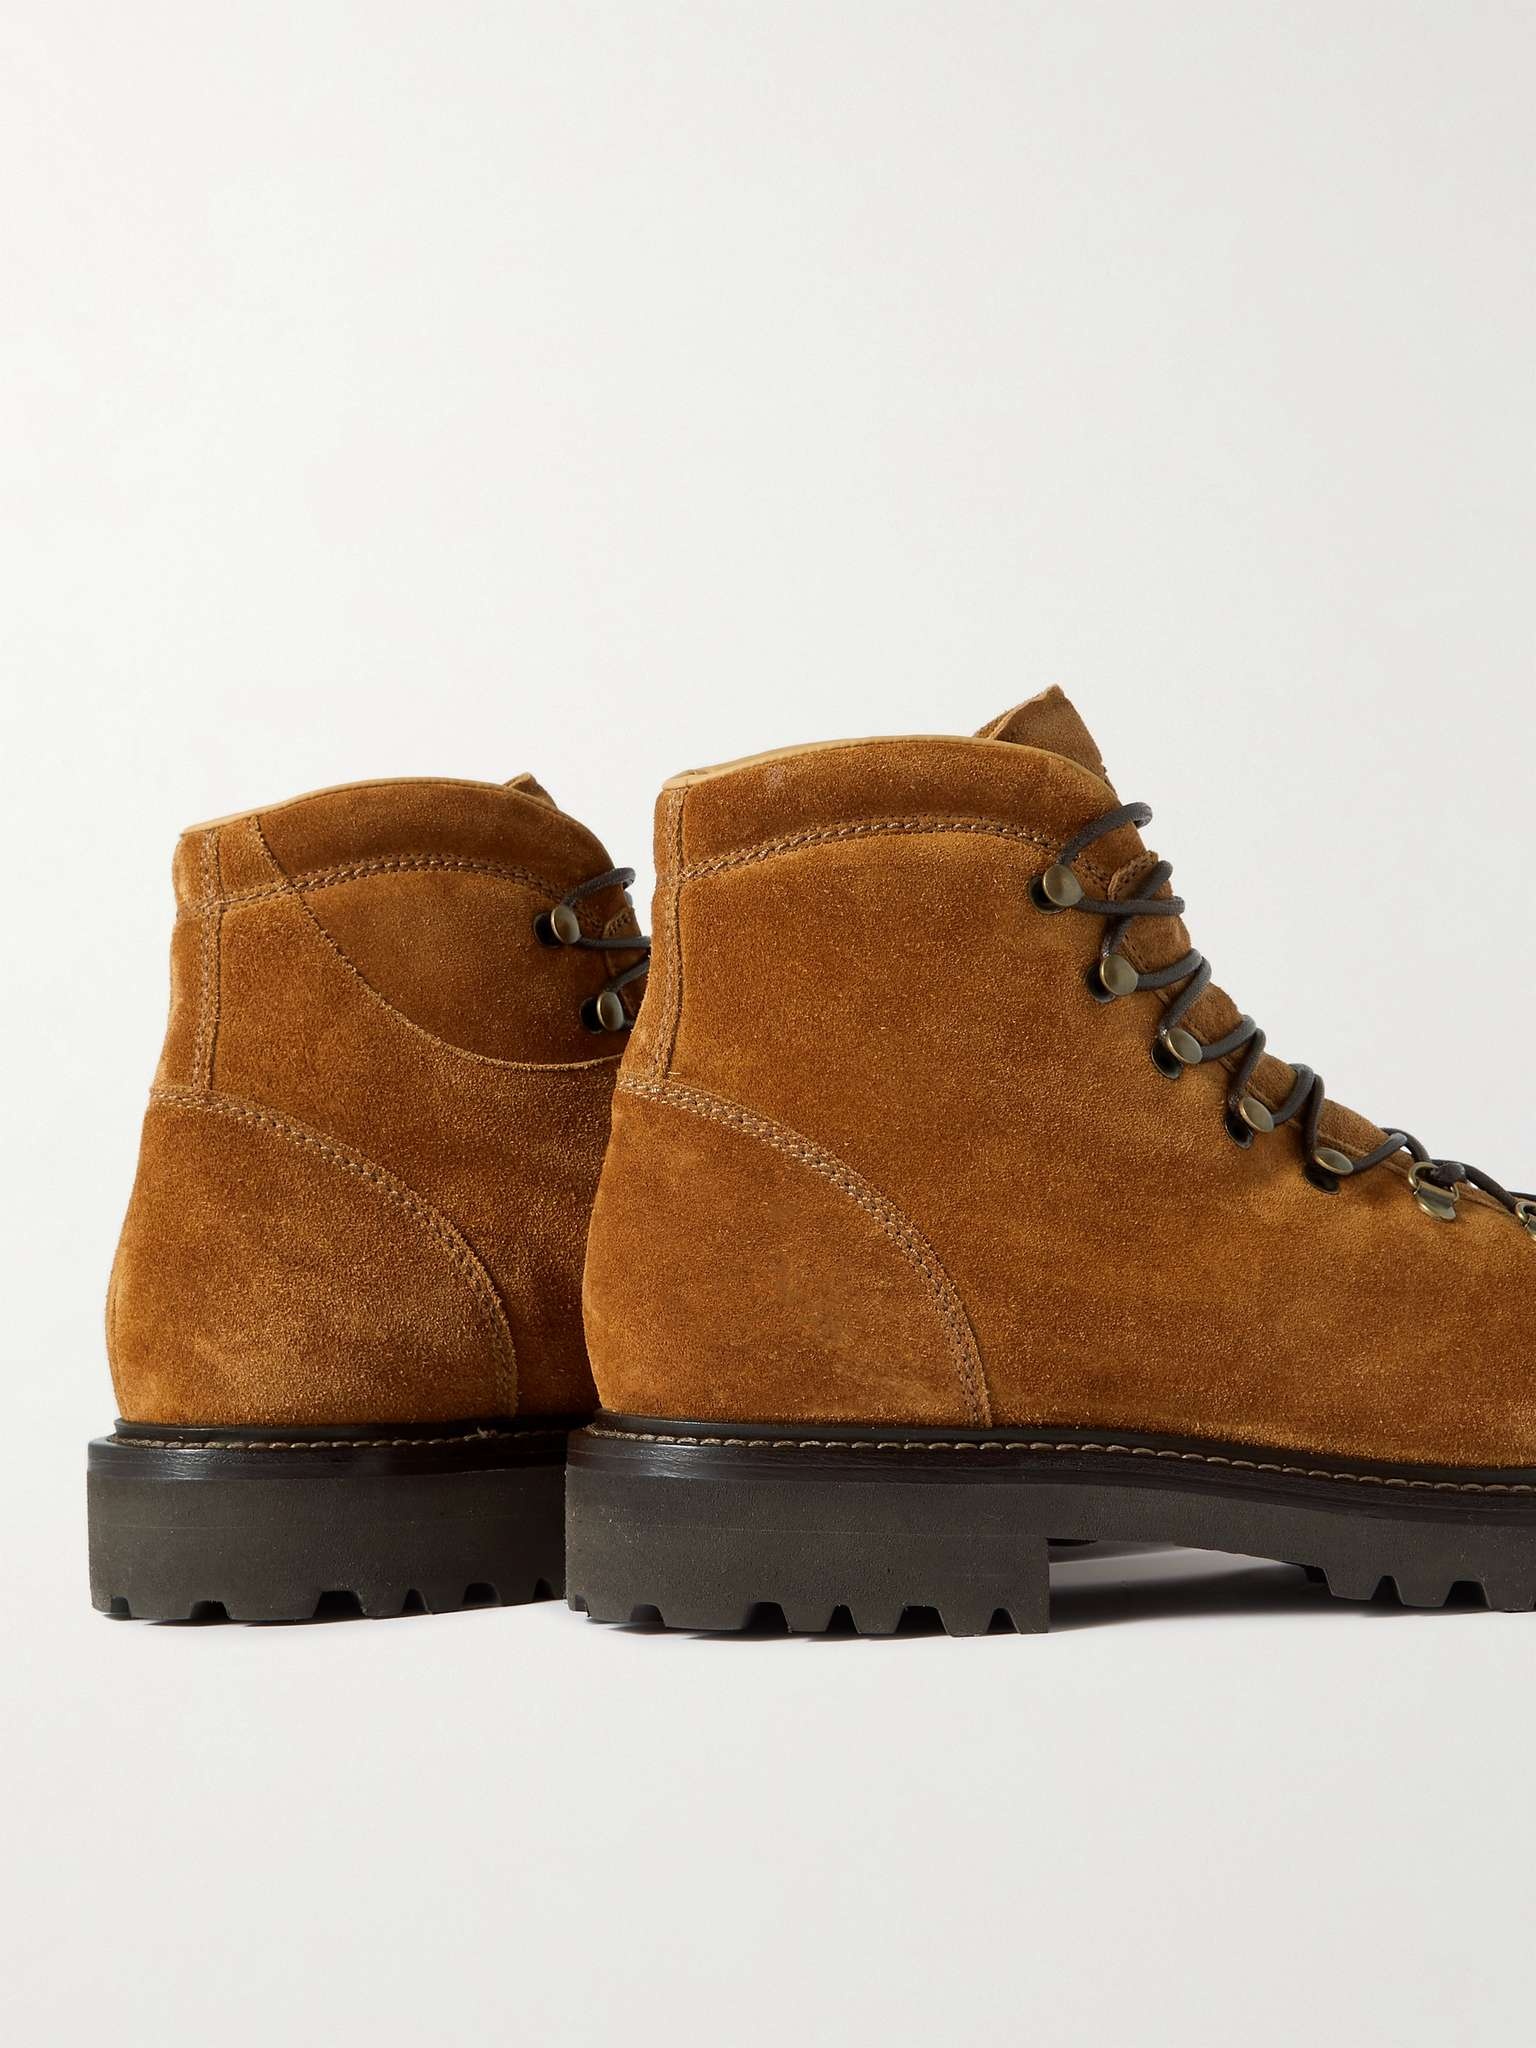 Shearling-Lined Suede Hiking Boots - 5